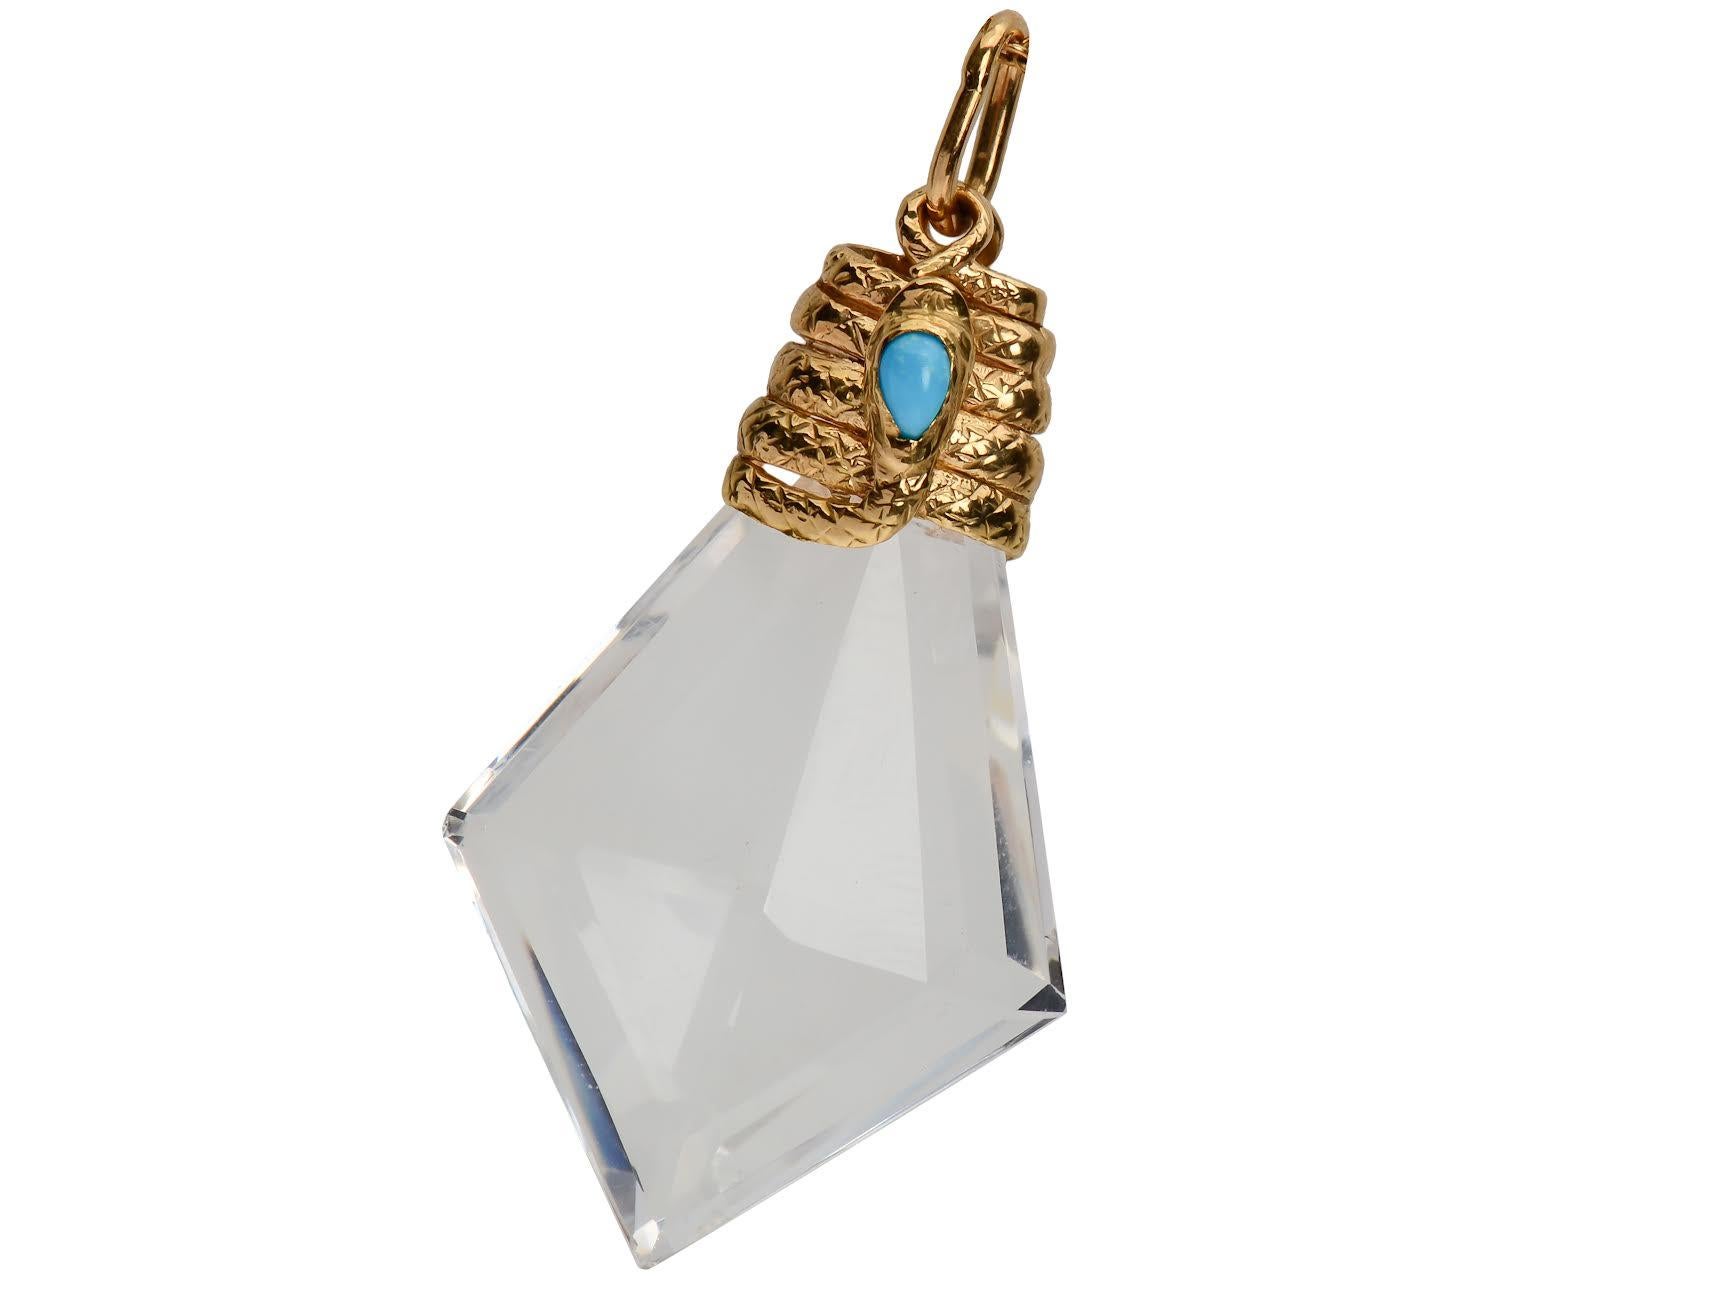 An 18 Kt gold serpent set with a turquoise wraps around the top of this icy clear rock crystal prism creating a talisman you will treasure. The crystal is strikingly faceted into an elongated diamond shape. The size and proportions are perfect. Rock